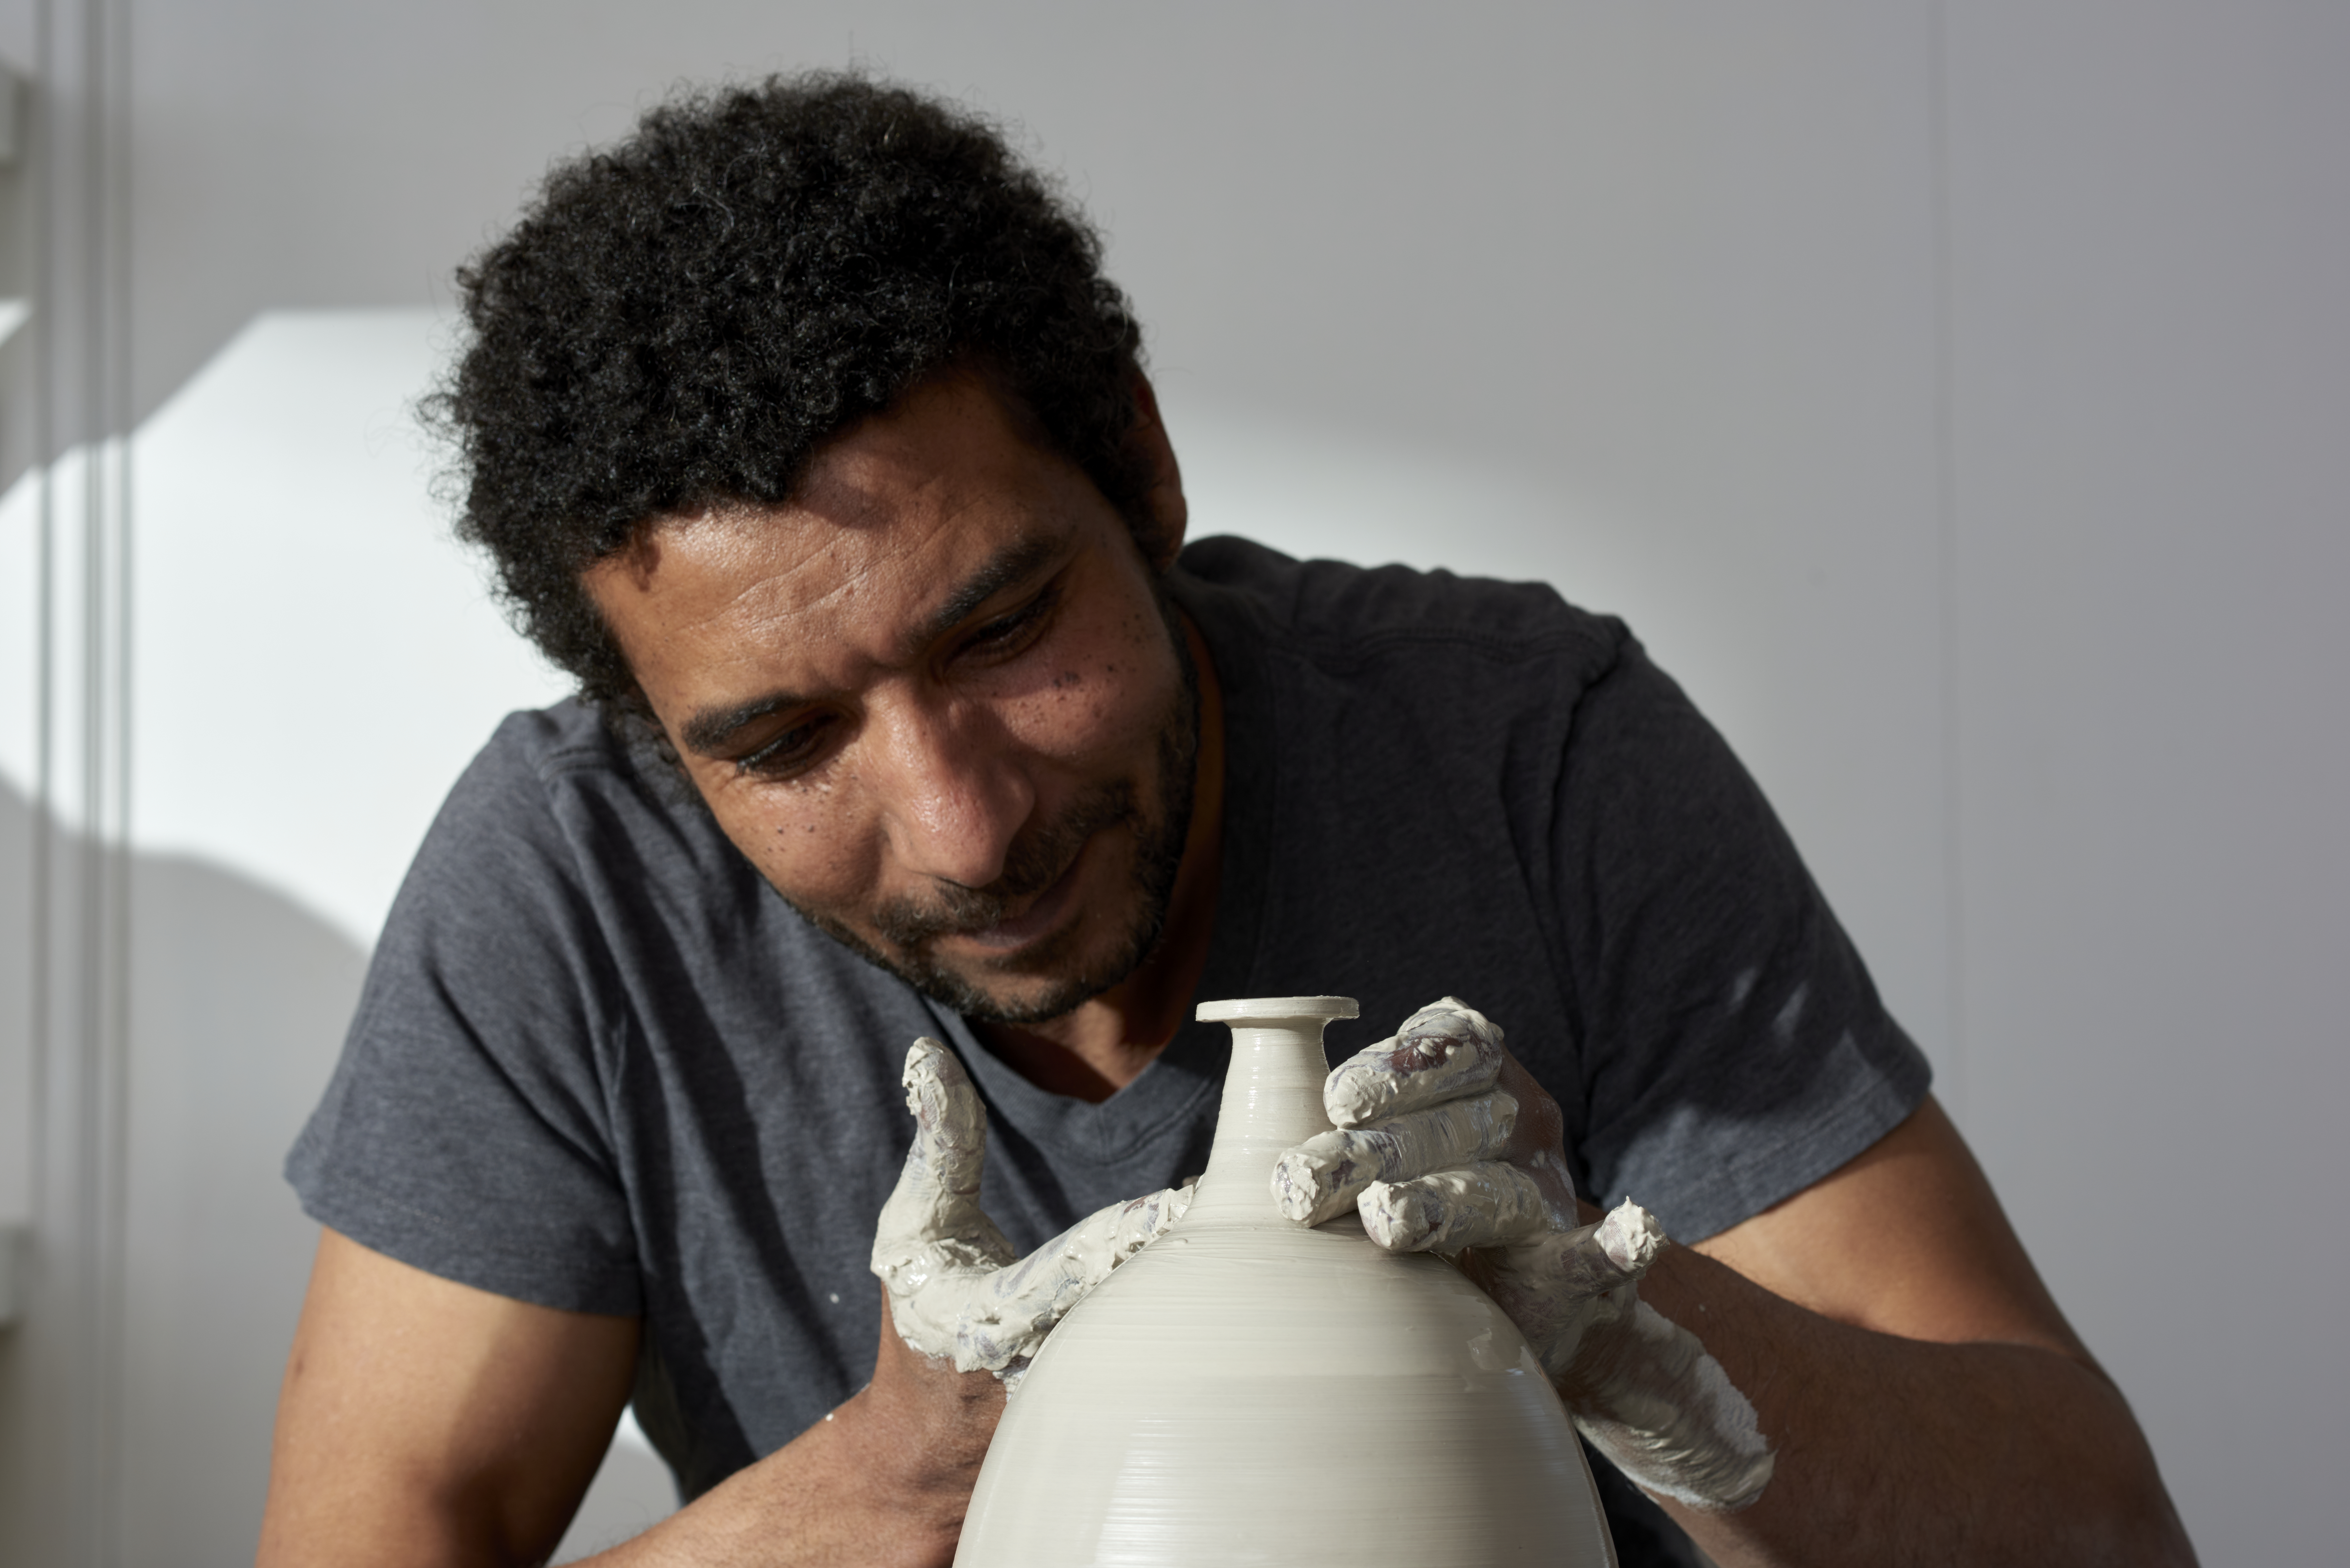 Renowned Egyptian ceramist Ibrahim Said will give a two-day workshop focused on geometry in Islamic design at SF Clayworks in San Francisco in June. Photo by Dhanraj Emanuel.